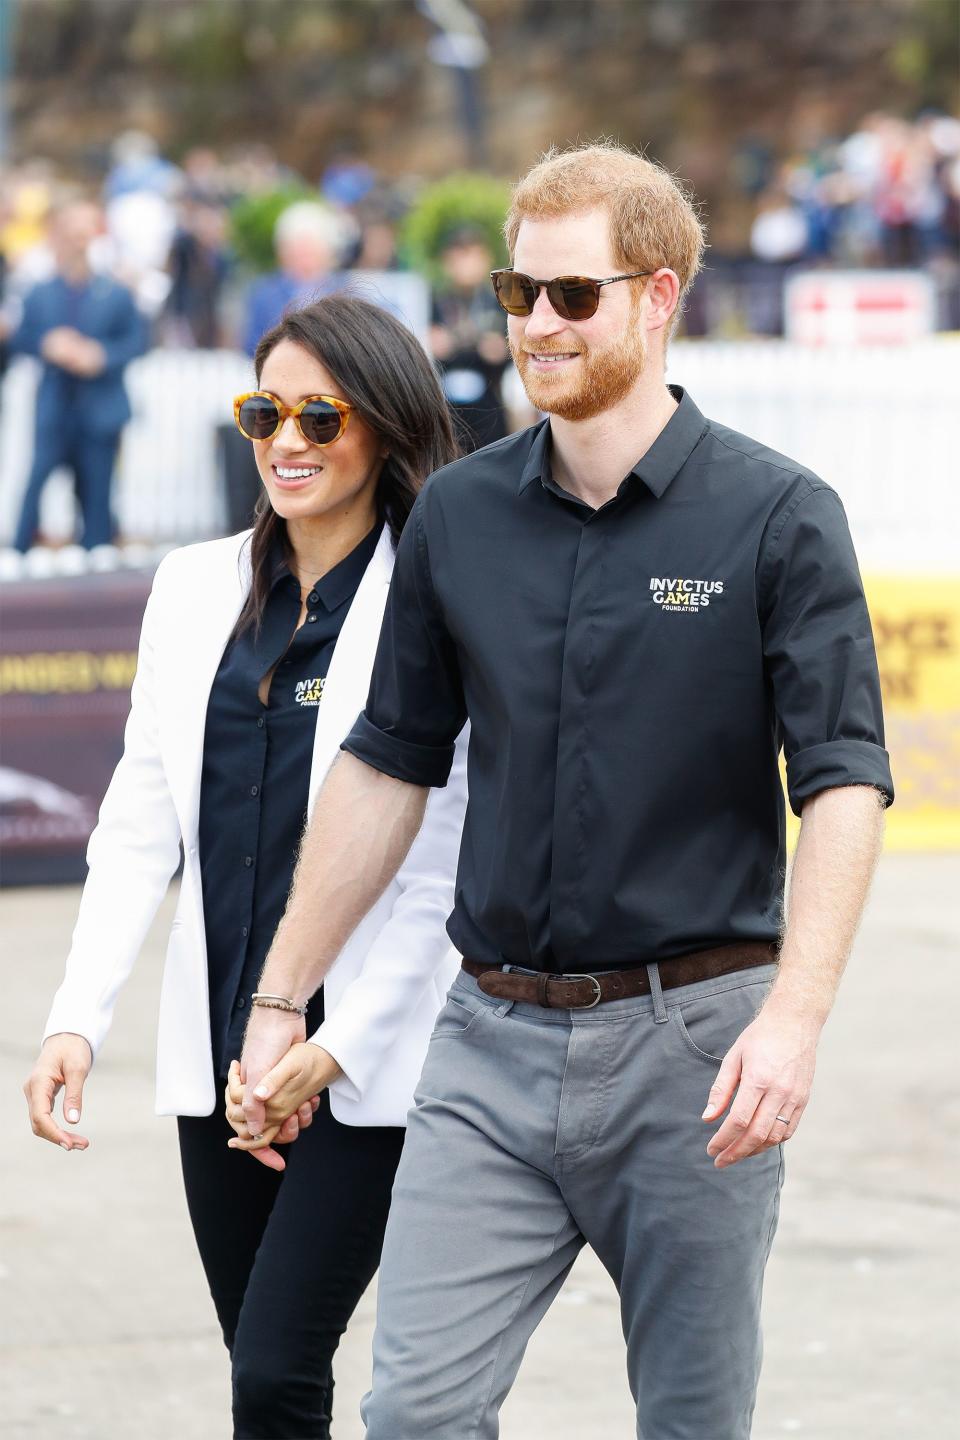 <p>Meghan Markle and Prince Harry's <a rel="nofollow noopener" href="https://www.harpersbazaar.com/celebrity/latest/a23983803/meghan-markle-prince-harry-royal-tour-invictus-games-one-year-on/" target="_blank" data-ylk="slk:first royal tour;elm:context_link;itc:0;sec:content-canvas" class="link ">first royal tour</a> started with aplomb when the royals announced that they're <a rel="nofollow noopener" href="https://www.harpersbazaar.com/celebrity/latest/a23984915/meghan-markle-jenna-coleman-emilia-wickstead-dress-royal-tour/" target="_blank" data-ylk="slk:expecting their first baby;elm:context_link;itc:0;sec:content-canvas" class="link ">expecting their first baby</a> together. And now that we know <a rel="nofollow noopener" href="https://www.harpersbazaar.com/celebrity/latest/a23969998/meghan-markle-royal-tour-australia-emilia-wickstead-dress-sydney/" target="_blank" data-ylk="slk:Meghan is pregnant;elm:context_link;itc:0;sec:content-canvas" class="link ">Meghan is pregnant</a>, everyone is understandably excited to see the <a rel="nofollow noopener" href="https://www.harpersbazaar.com/celebrity/latest/a23981667/meghan-markle-royal-tour-australia-stella-mccartney-dress-gillian-anderson-coat/" target="_blank" data-ylk="slk:Duke and Duchess of Sussex;elm:context_link;itc:0;sec:content-canvas" class="link ">Duke and Duchess of Sussex</a> travel the world together before they start a family.</p><p>From attending the <a rel="nofollow noopener" href="https://www.harpersbazaar.com/celebrity/latest/g23985144/meghan-markle-prince-harry-invictus-games-opening-ceremony-pda-photos/" target="_blank" data-ylk="slk:Invictus Games opening ceremony;elm:context_link;itc:0;sec:content-canvas" class="link ">Invictus Games opening ceremony</a>, to traveling to <a rel="nofollow noopener" href="https://www.harpersbazaar.com/celebrity/latest/a23979174/meghan-markle-royal-tour-cockatoo-island-australia-illesteva-sunglasses/" target="_blank" data-ylk="slk:Cockatoo Island;elm:context_link;itc:0;sec:content-canvas" class="link ">Cockatoo Island</a>, Meghan and Harry have been extremely busy during the first week of their royal tour. Here, a look back at some of the sweetest moments you may have missed from the past week:</p>